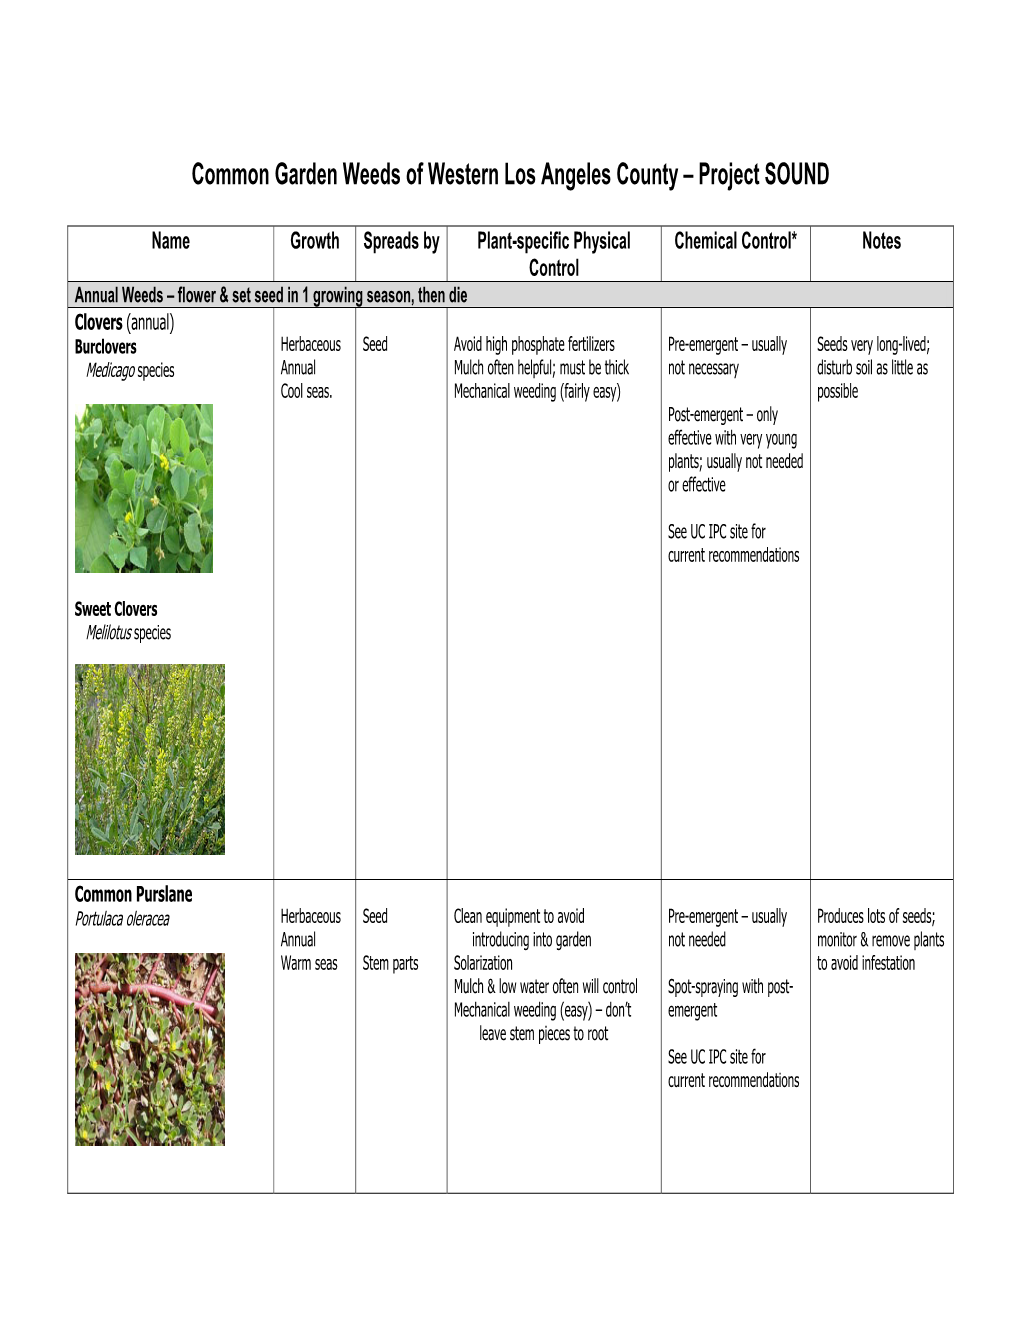 Common Garden Weeds of Western Los Angeles County – Project SOUND